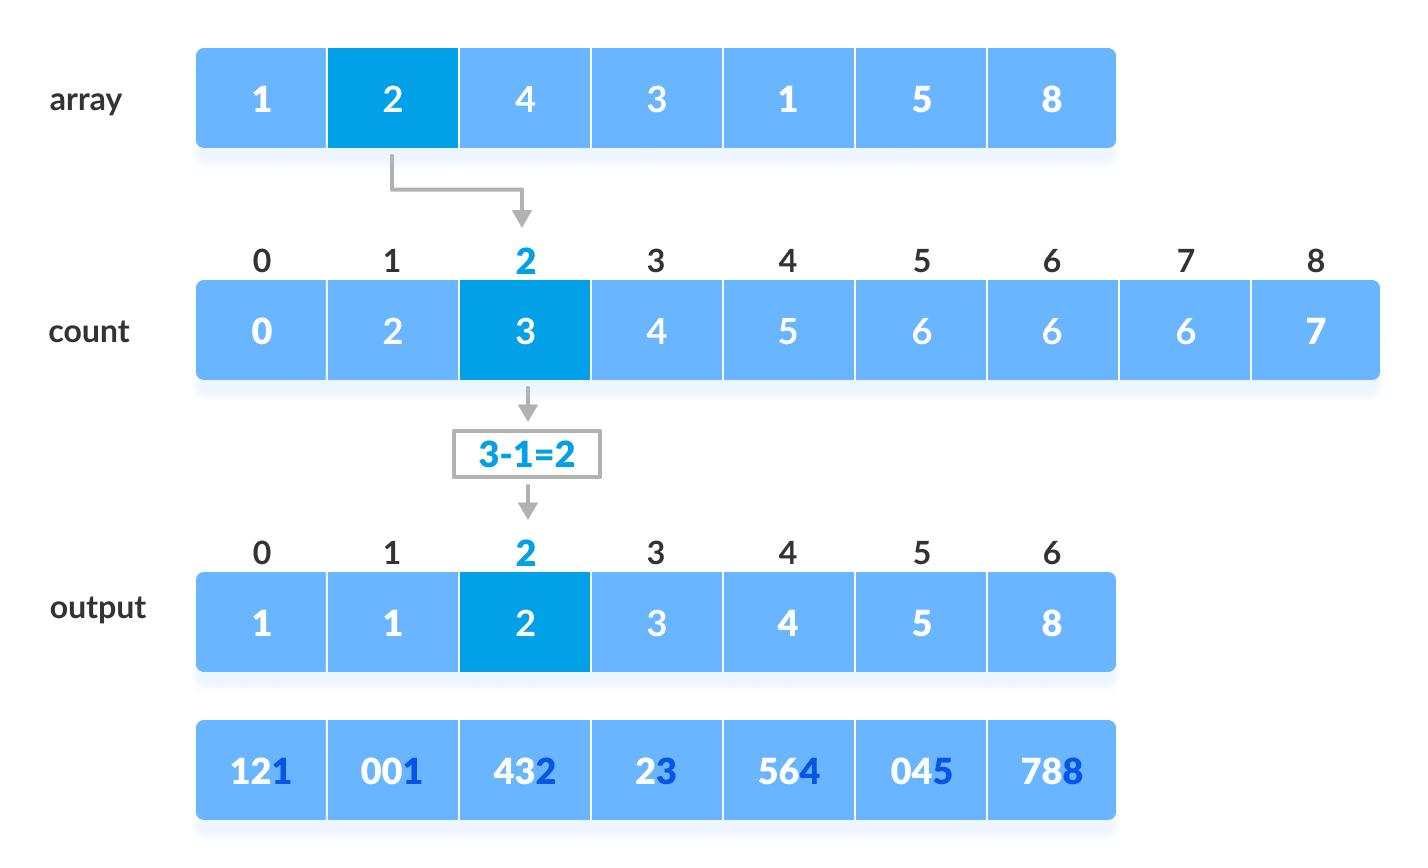 Radix Sort working with Counting Sort as intermediate step